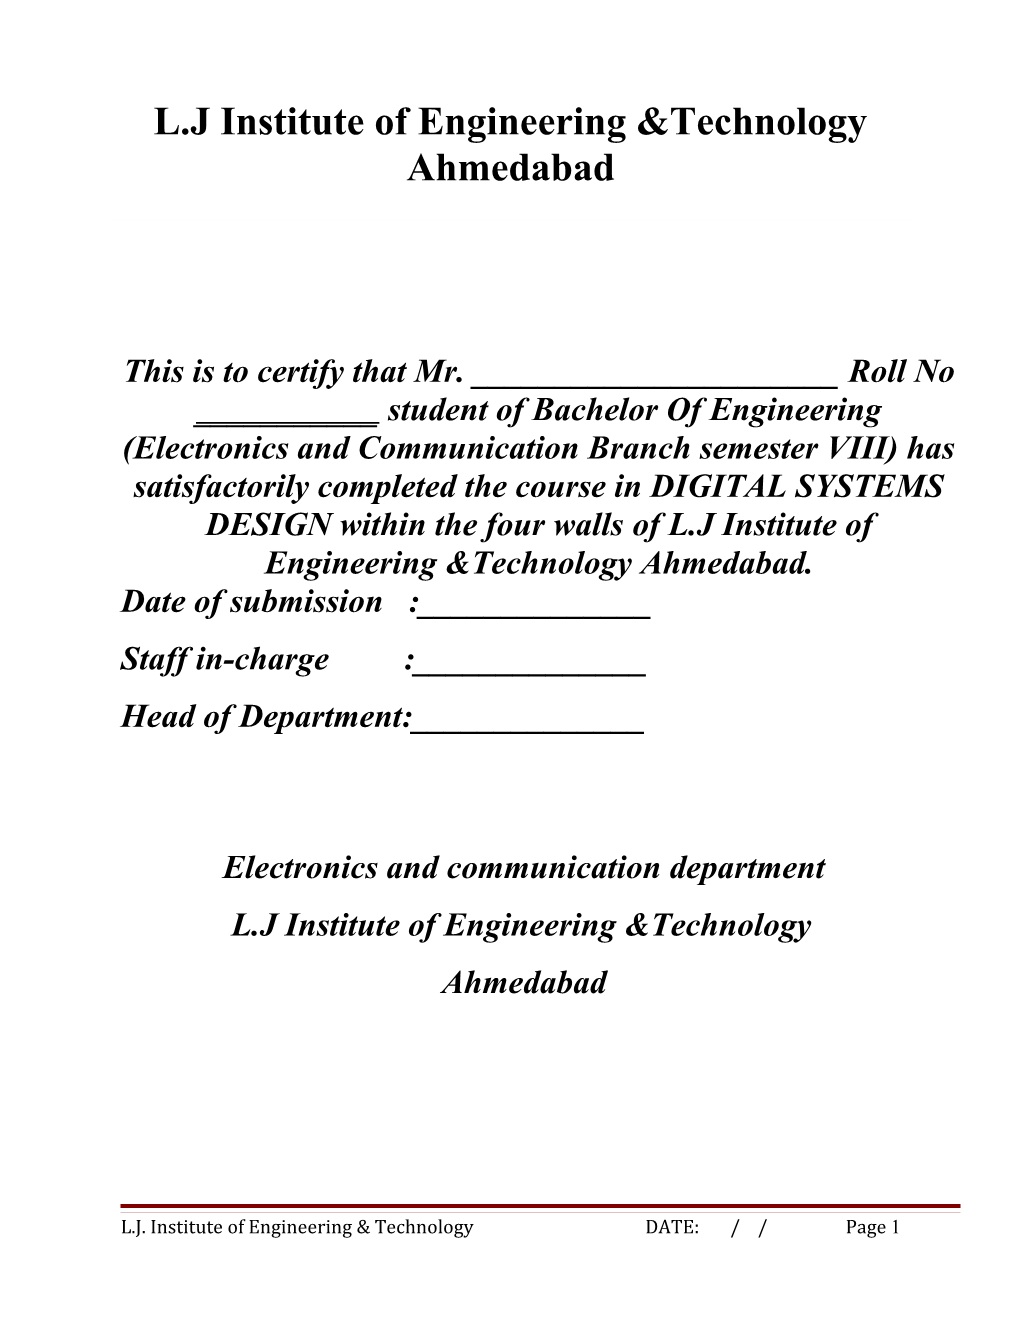 This Is to Certify That Mr. ______Roll No ______Student of Bachelor of Engineering (Electronics